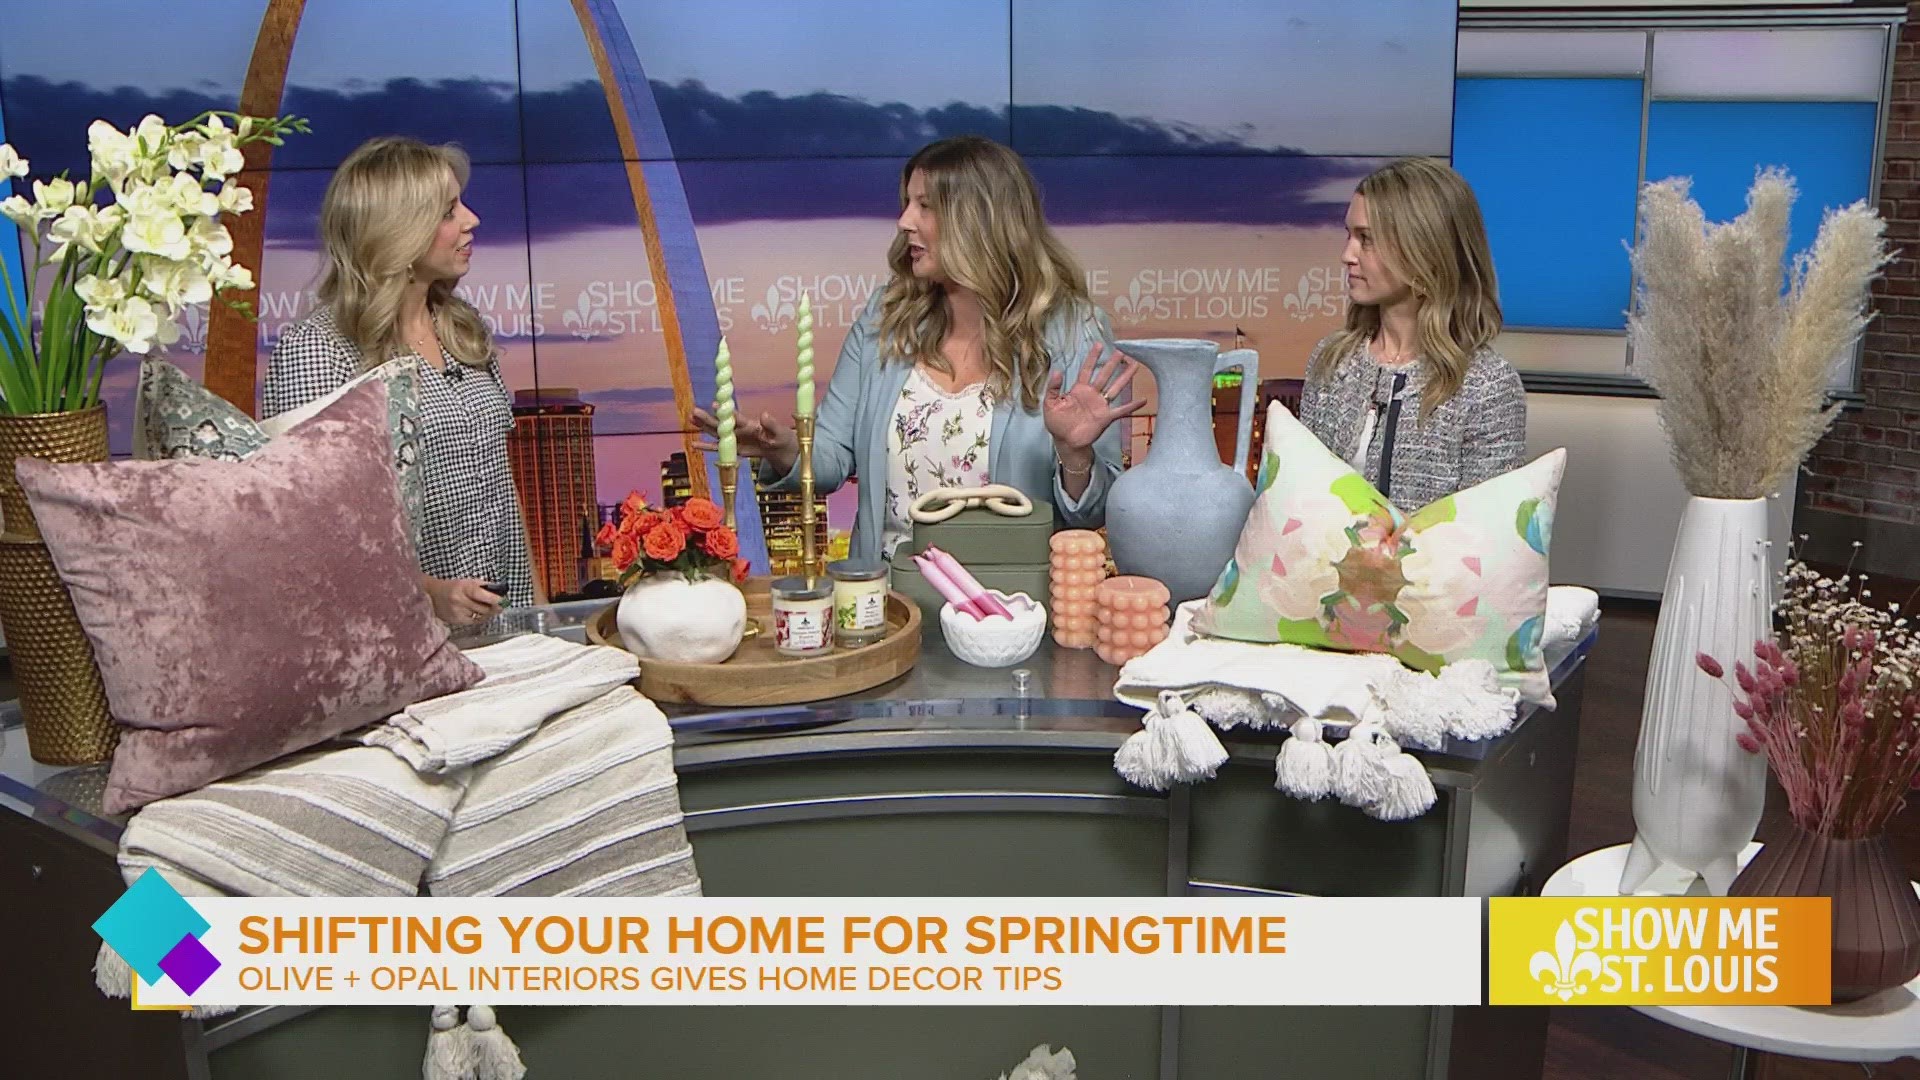 Oliva and Opal Interior share advice for refreshing your home for Spring